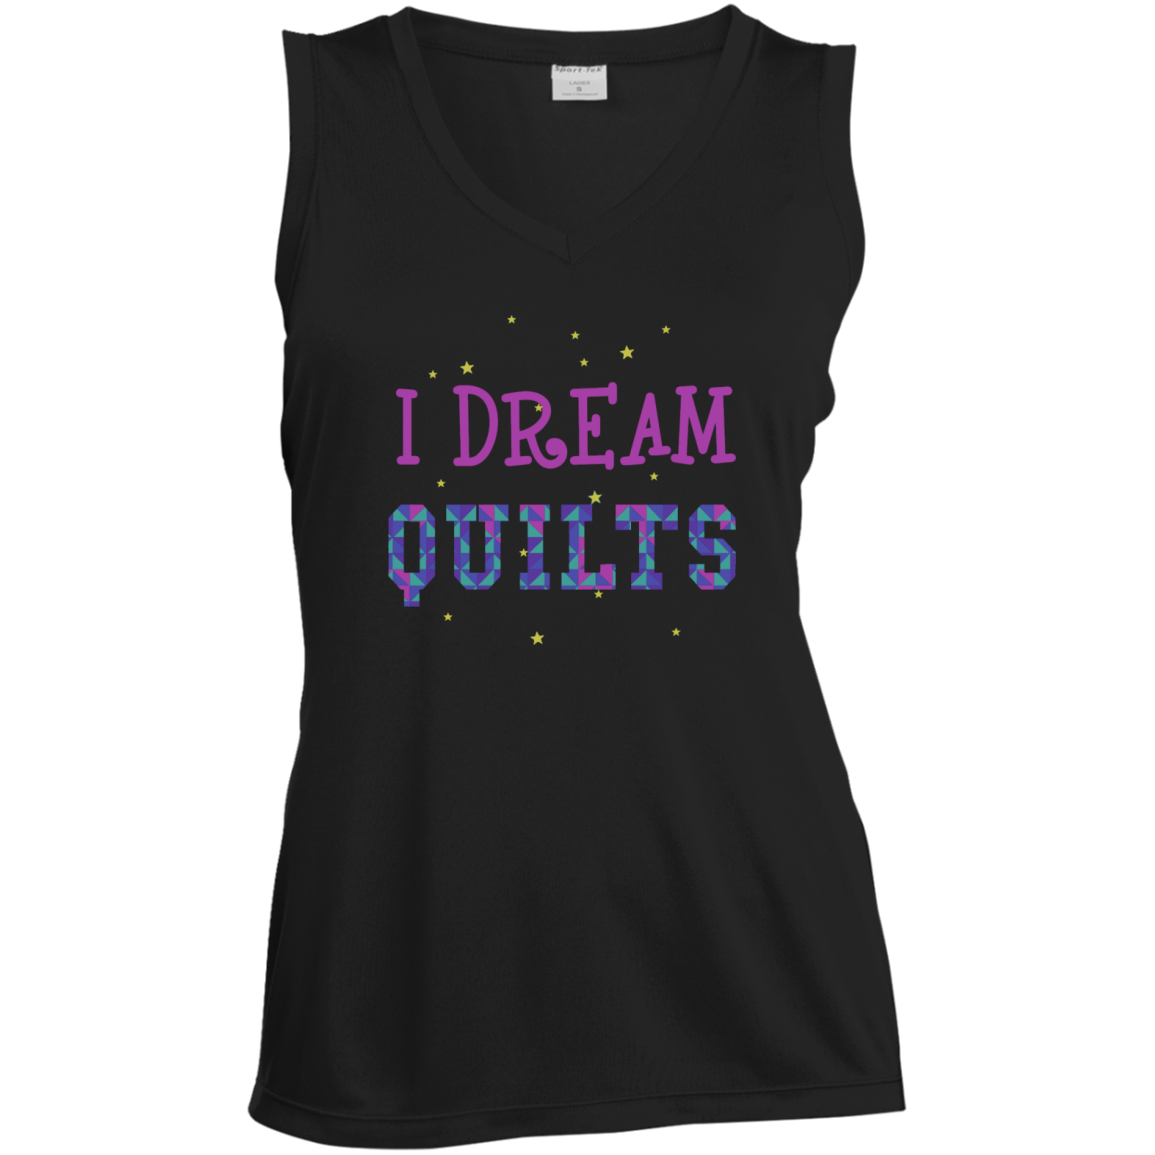 I Dream Quilts Ladies Sleeveless V-neck - Crafter4Life - 3